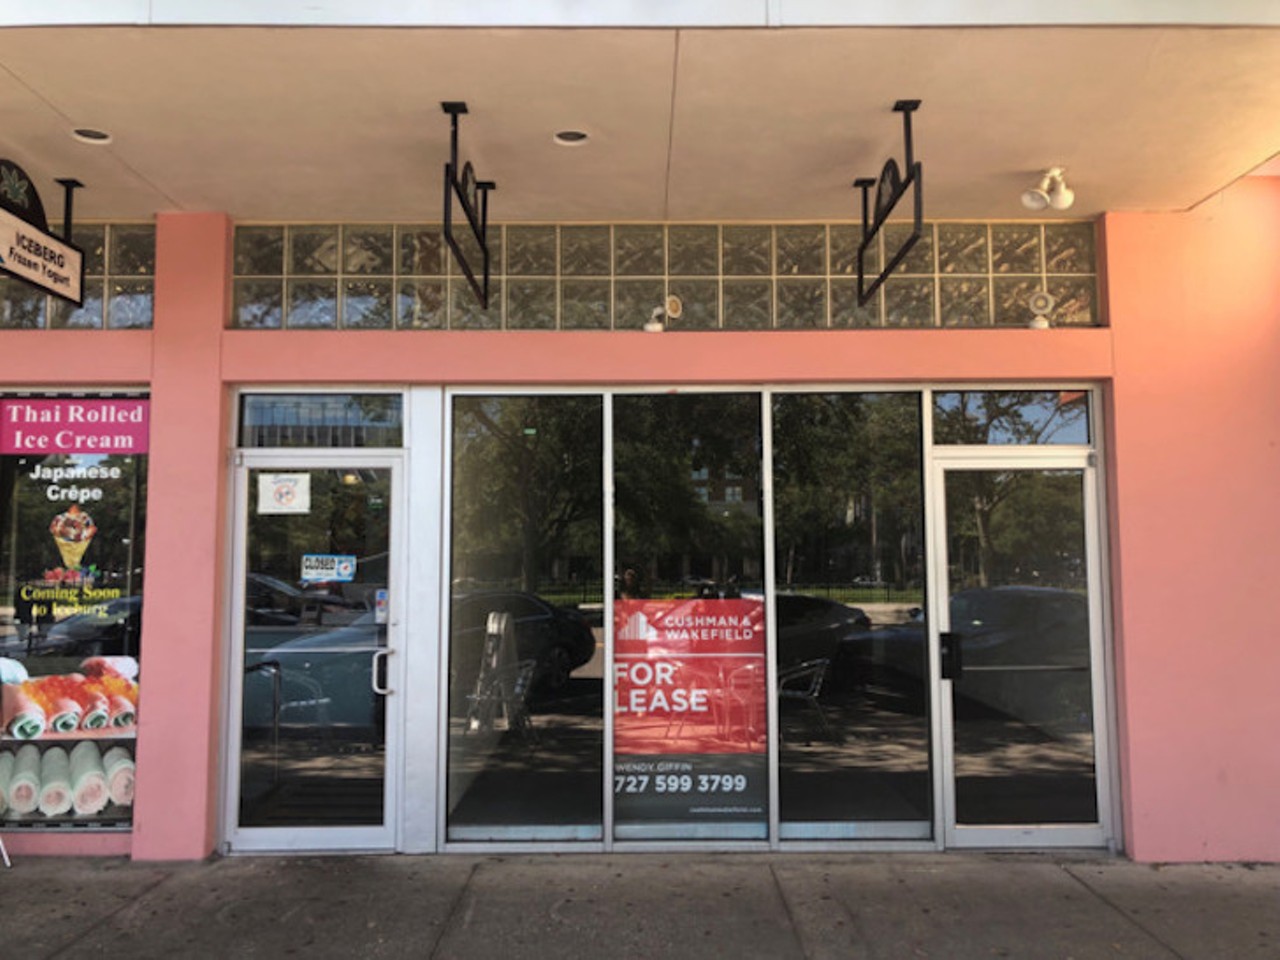 Greenstock  
449 Central Ave., St. Petersburg.
A new salad concept will take over the former Kalamazoo Olive Oil Company location. The owners of Il Ritorno will be crafting the menu with fresh ingredients and house-made dressings.
Photo via The Hype Group